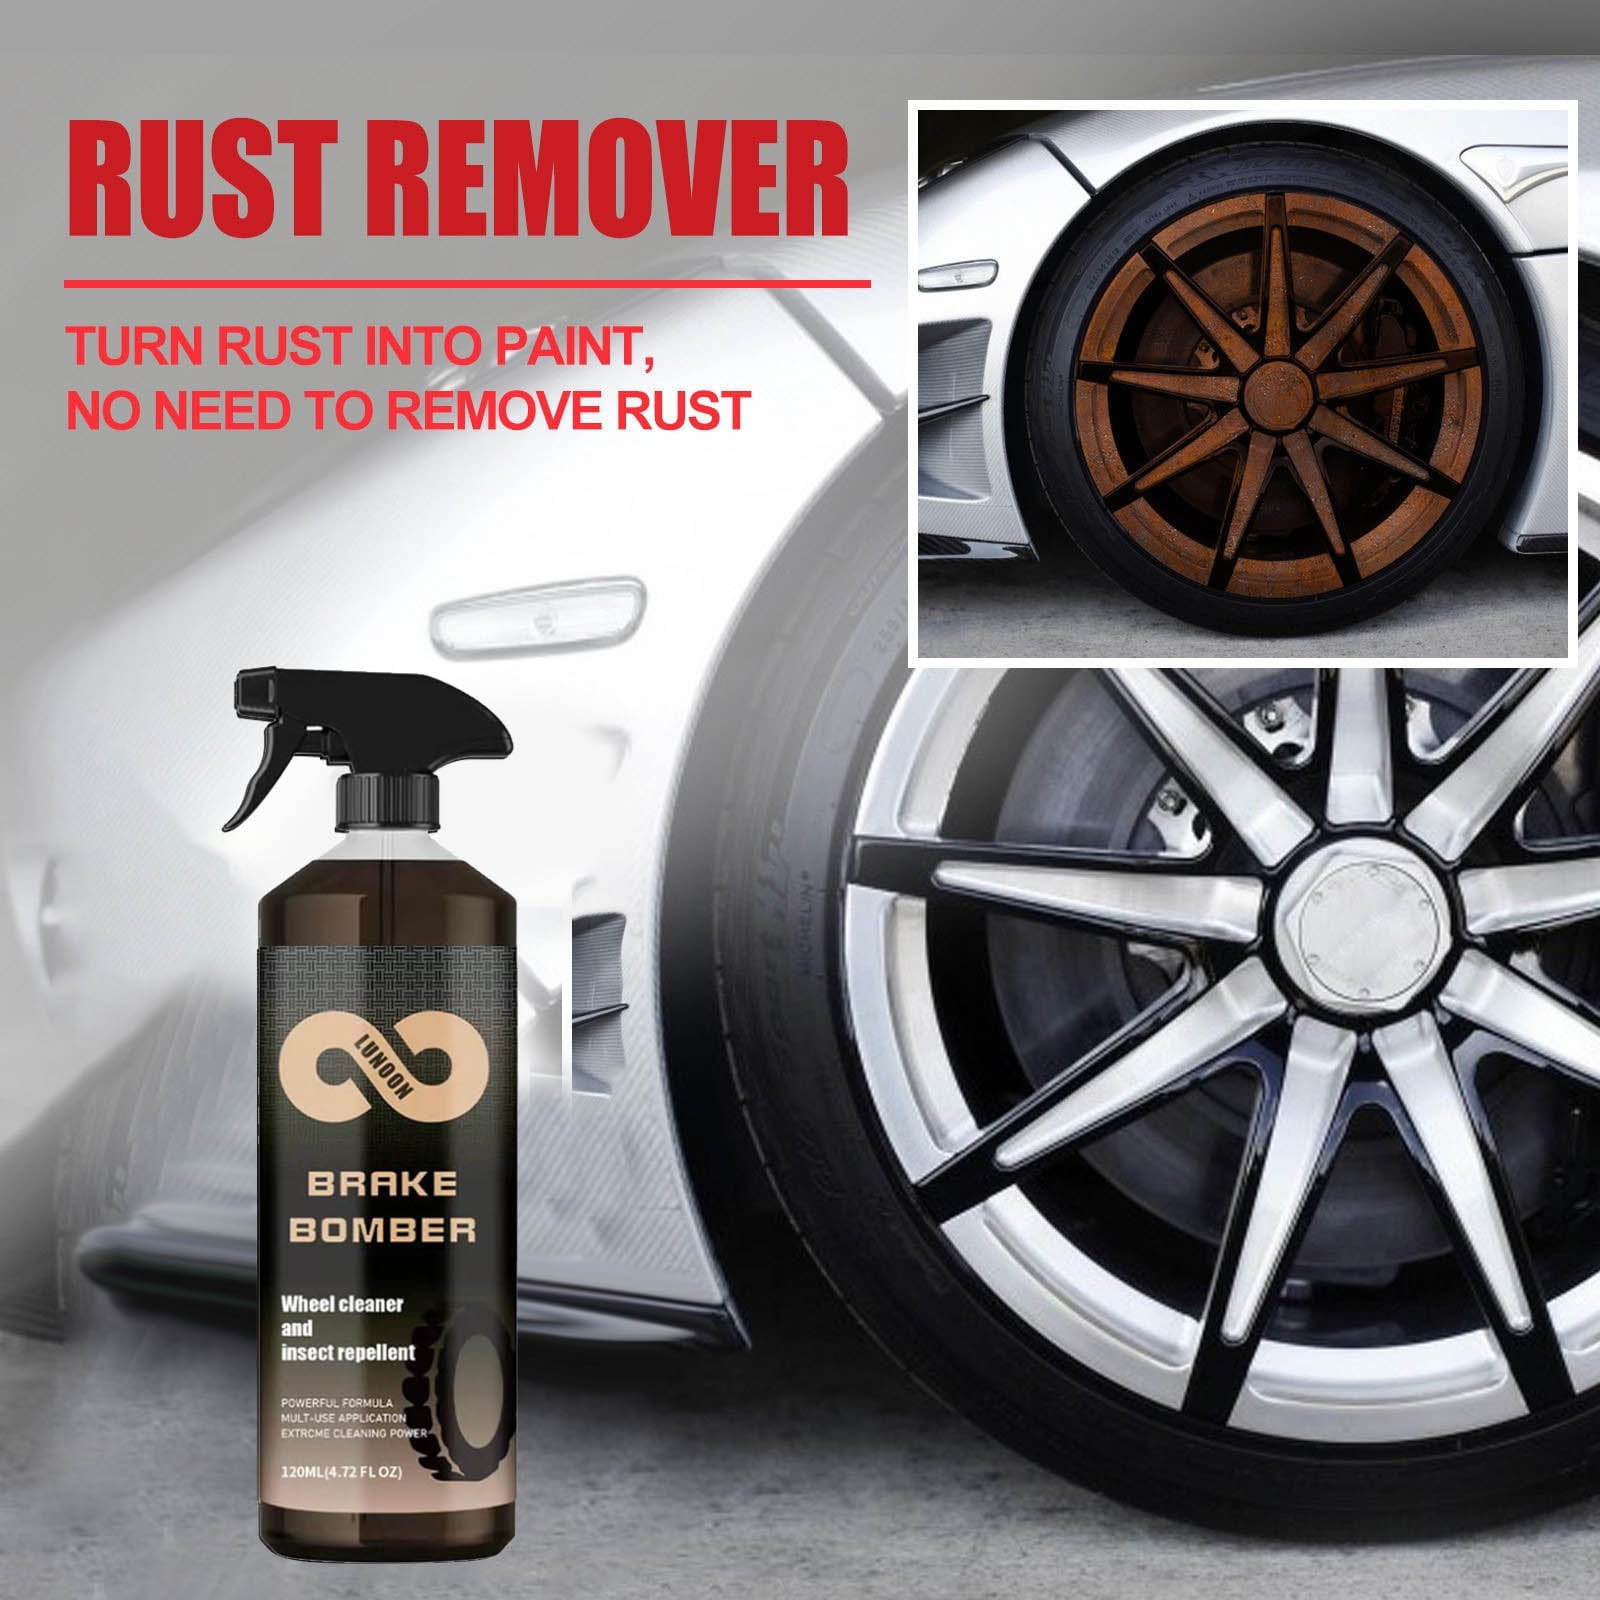 Stealth Garage Brake Bomber: 120ml Non-Acid Wheel Cleaner, Perfect for Cleaning Wheels and Tires, Rim Cleaner & Brake Dust Remover, Safe on Alloy